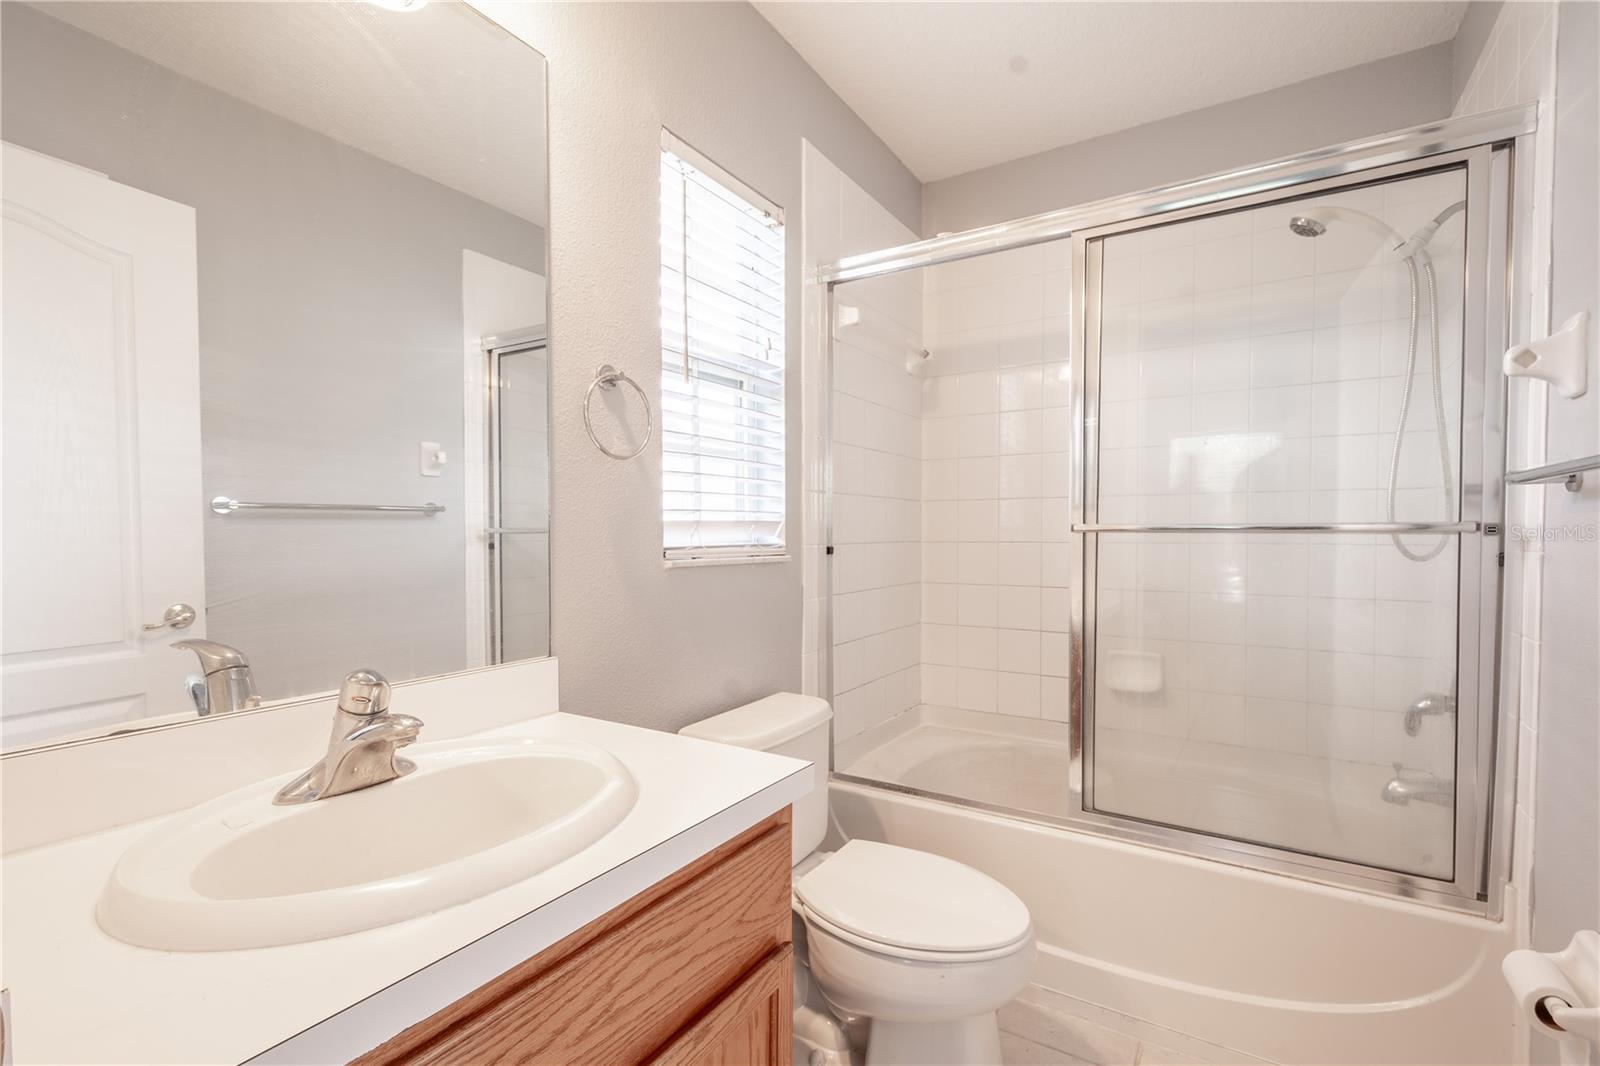 The primary ensuite features a tub with shower, and a mirrored vanity with storage.